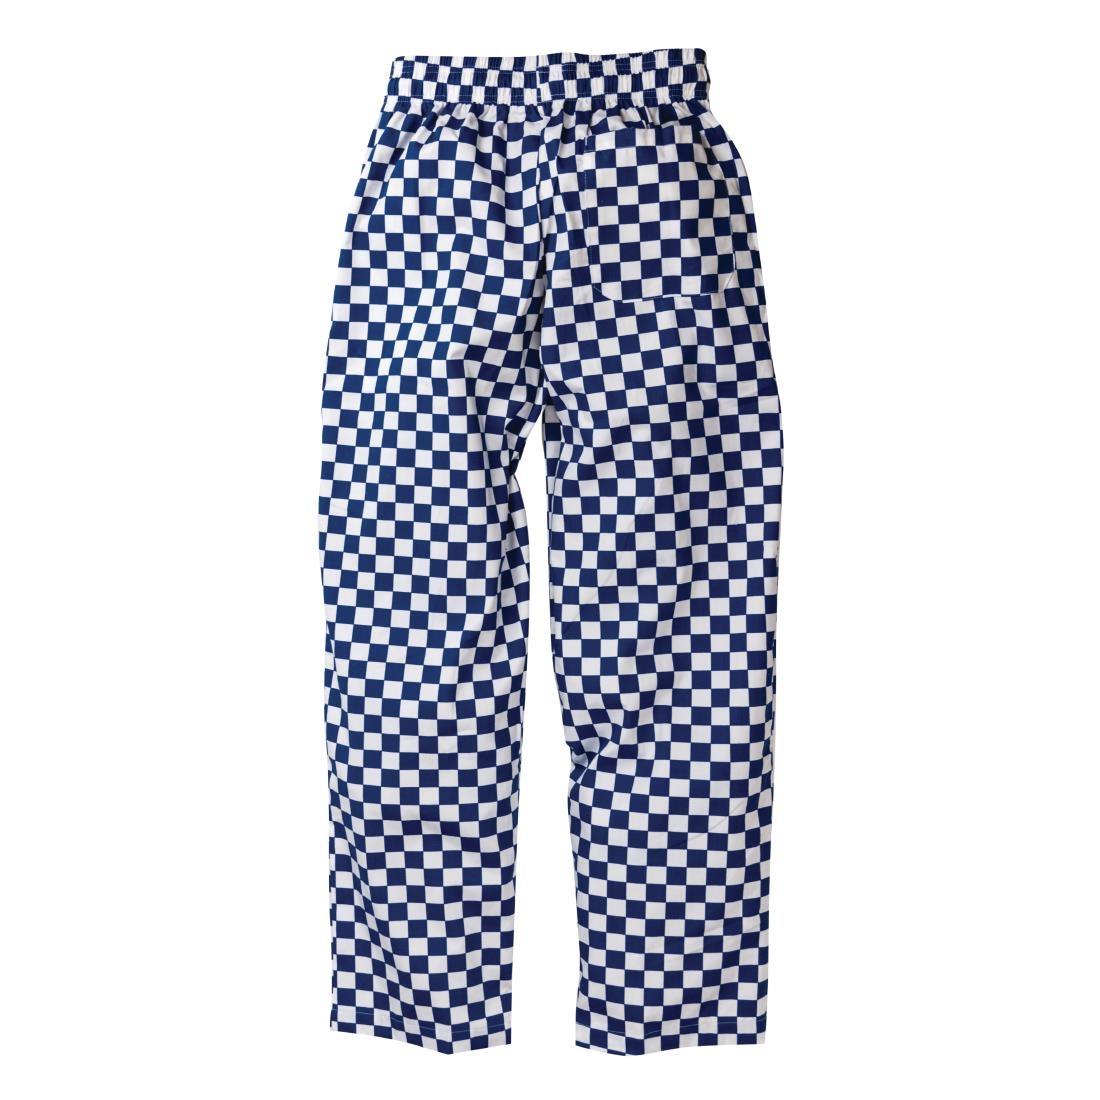 Chef Works Essential Baggy Pants Big Blue Check XS - A043-XS  - 2